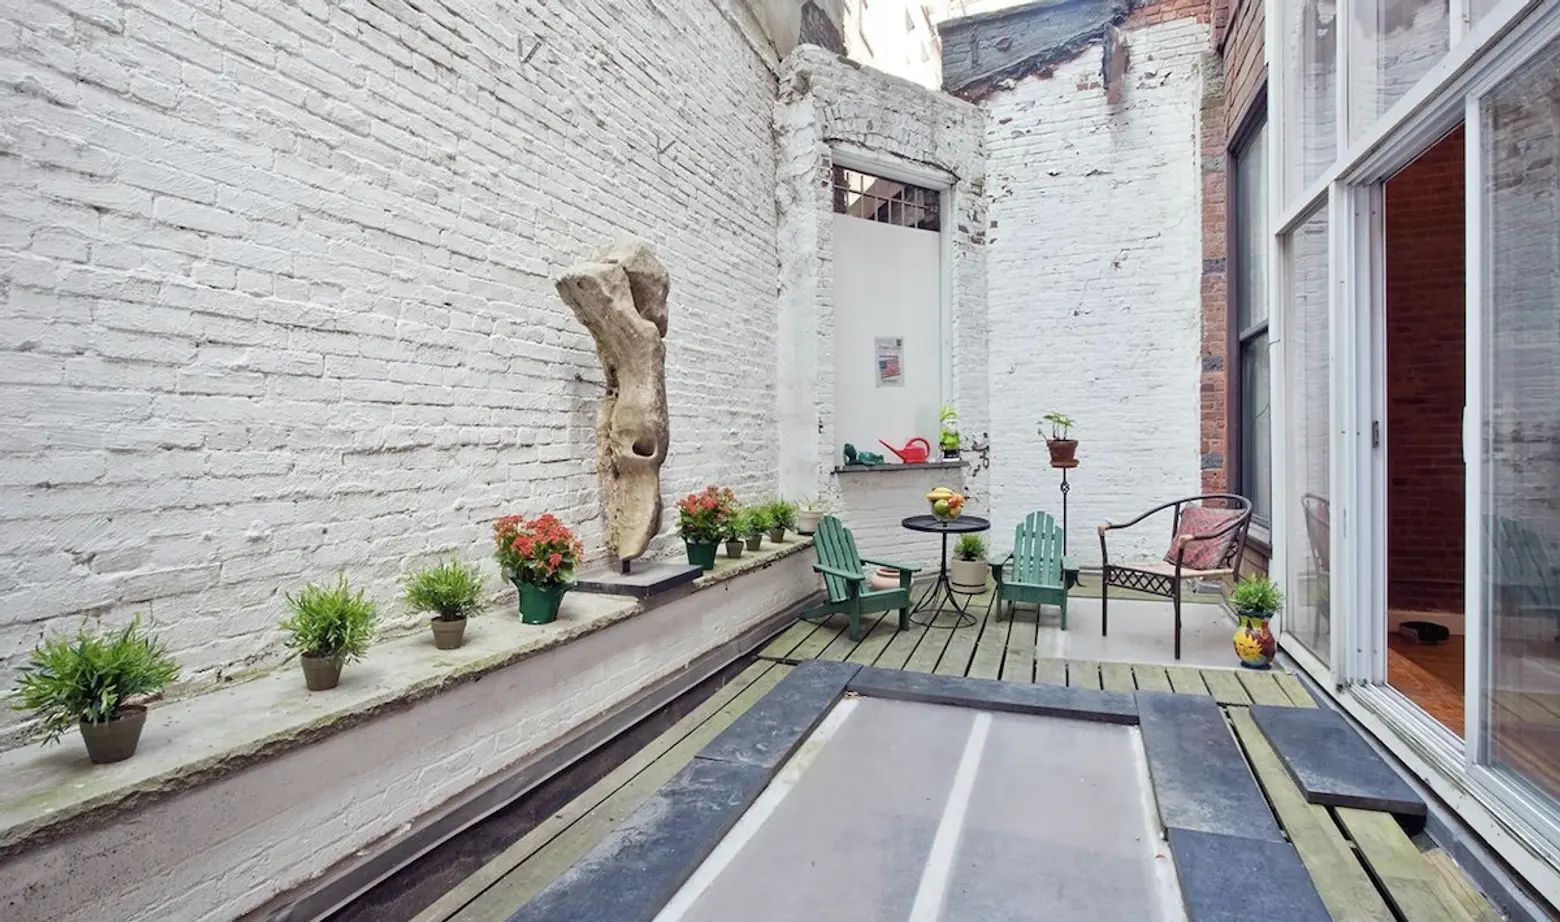 $4M Live/Work Tribeca Loft Offers Endless Options and an Artsy Outdoor Space